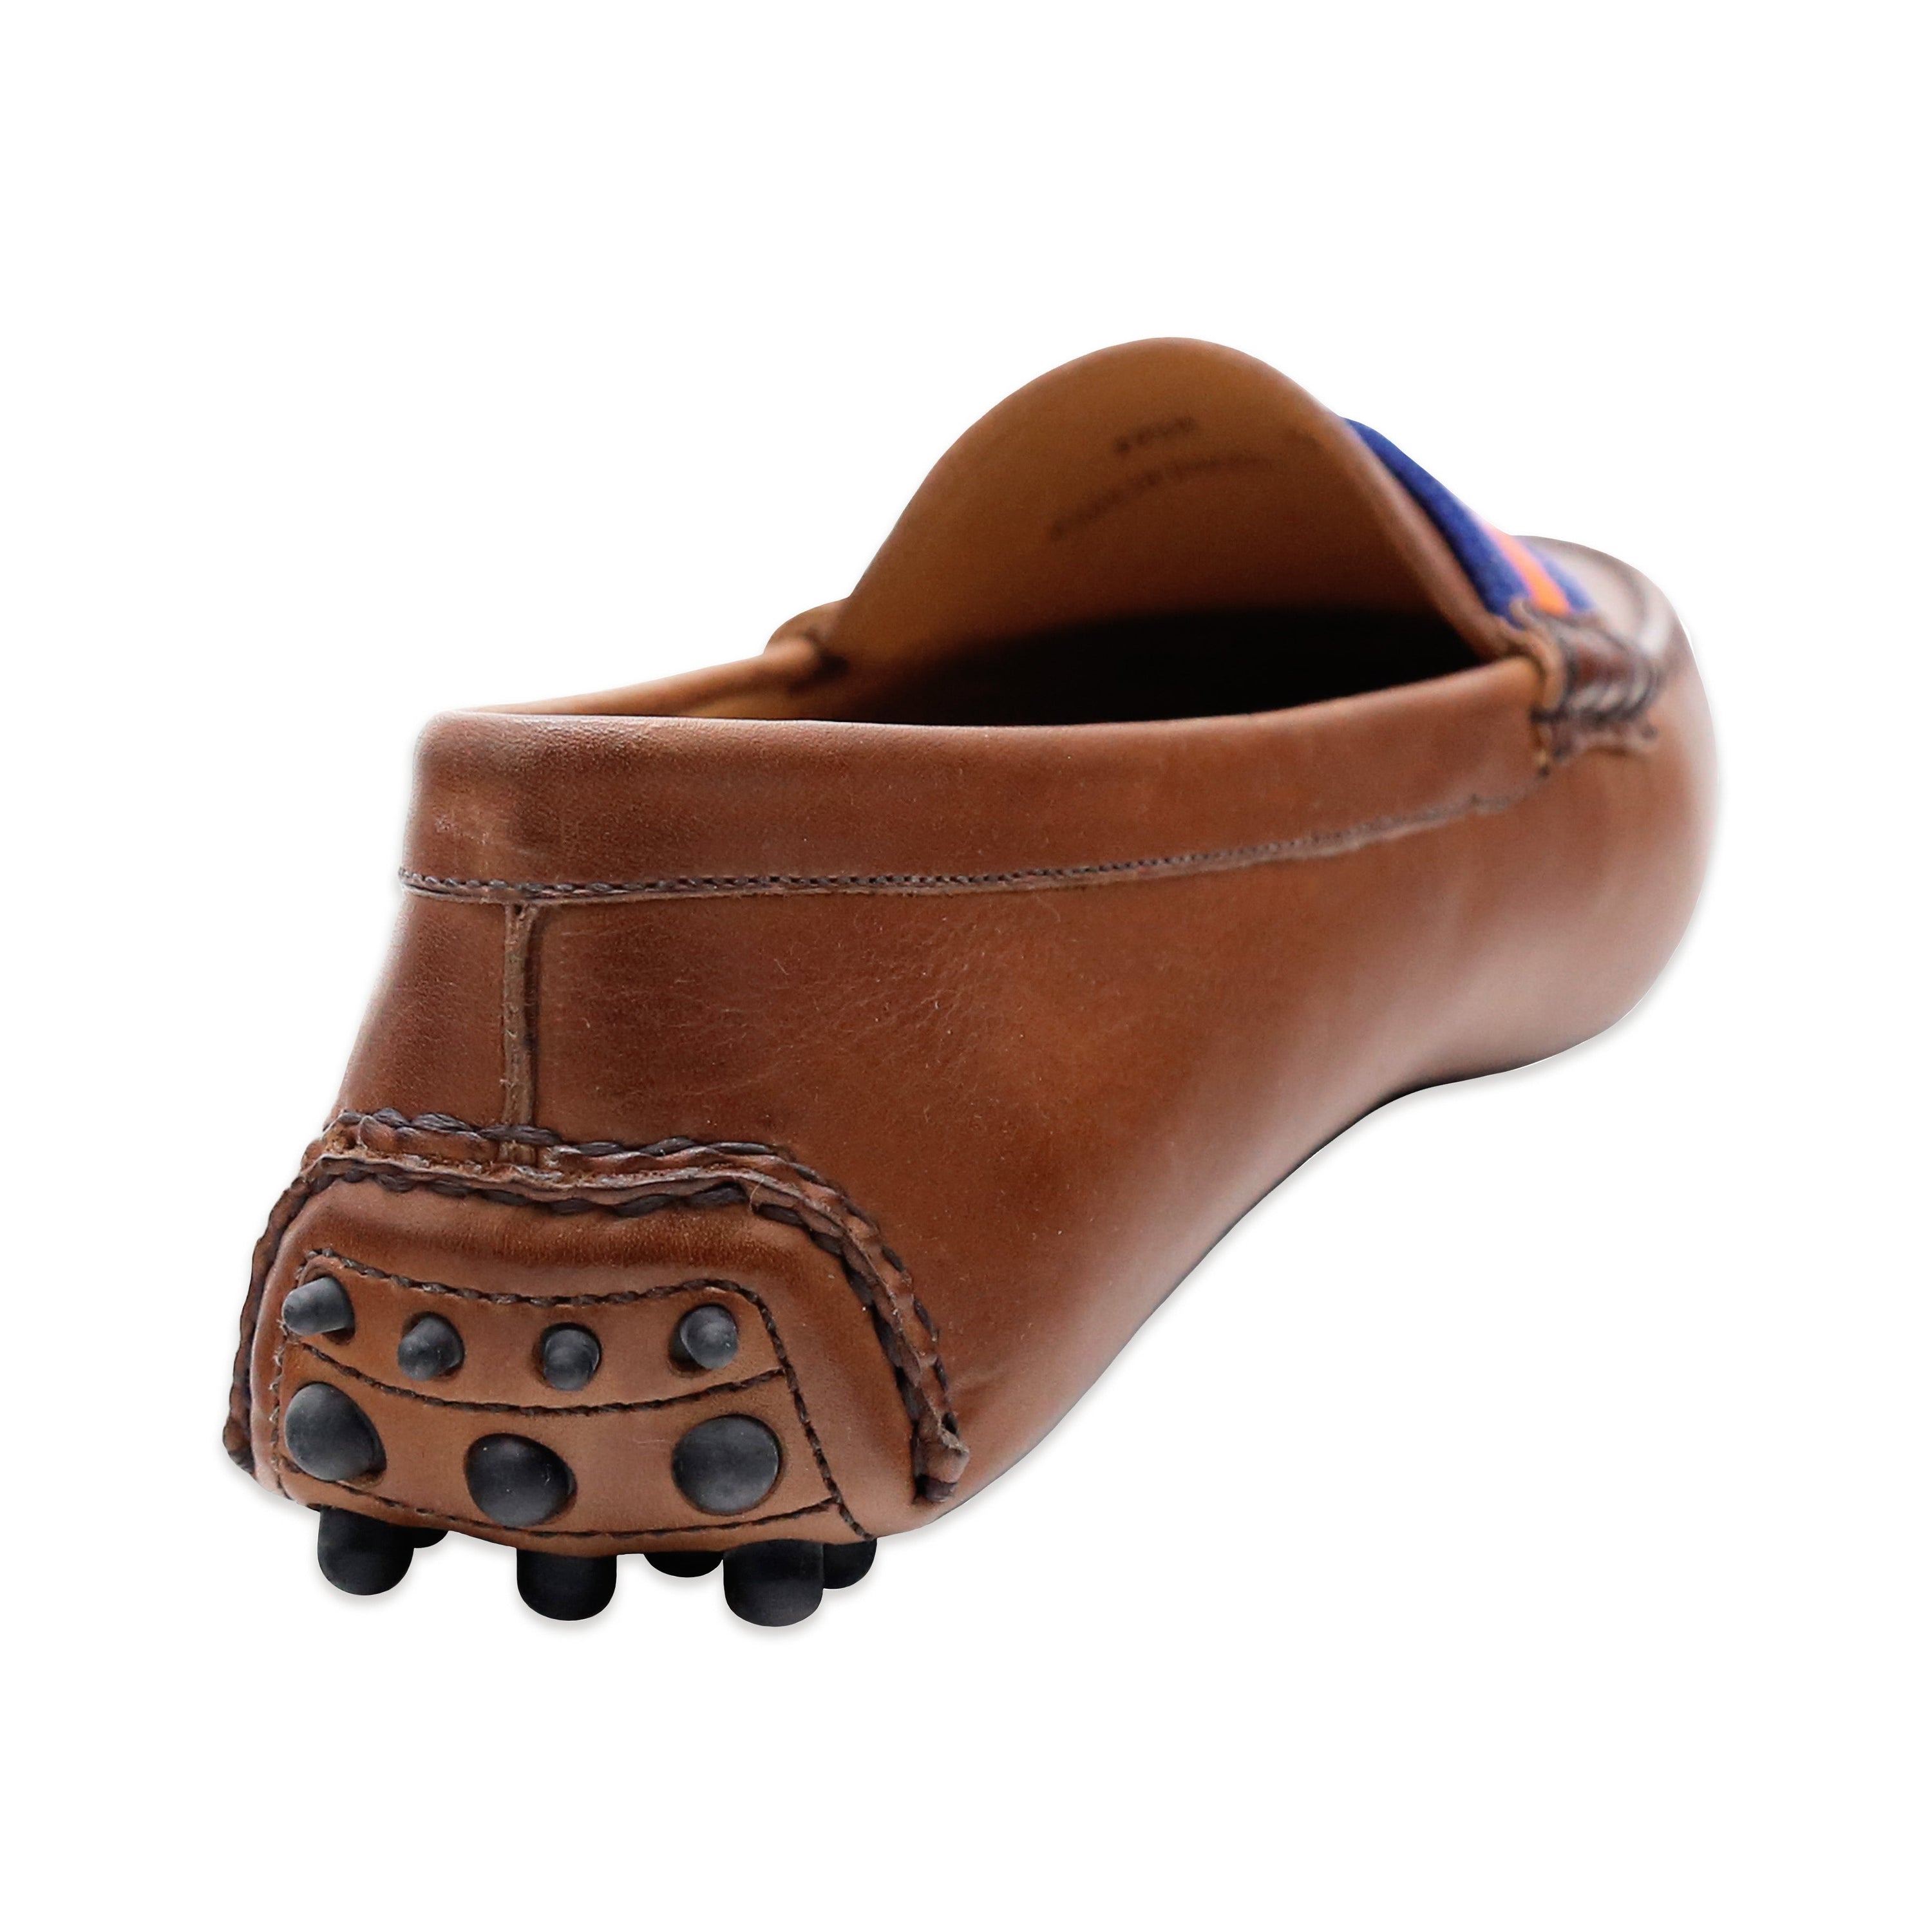 Surcingle Driving Shoes (Dark Navy-Red) (Chestnut Leather)